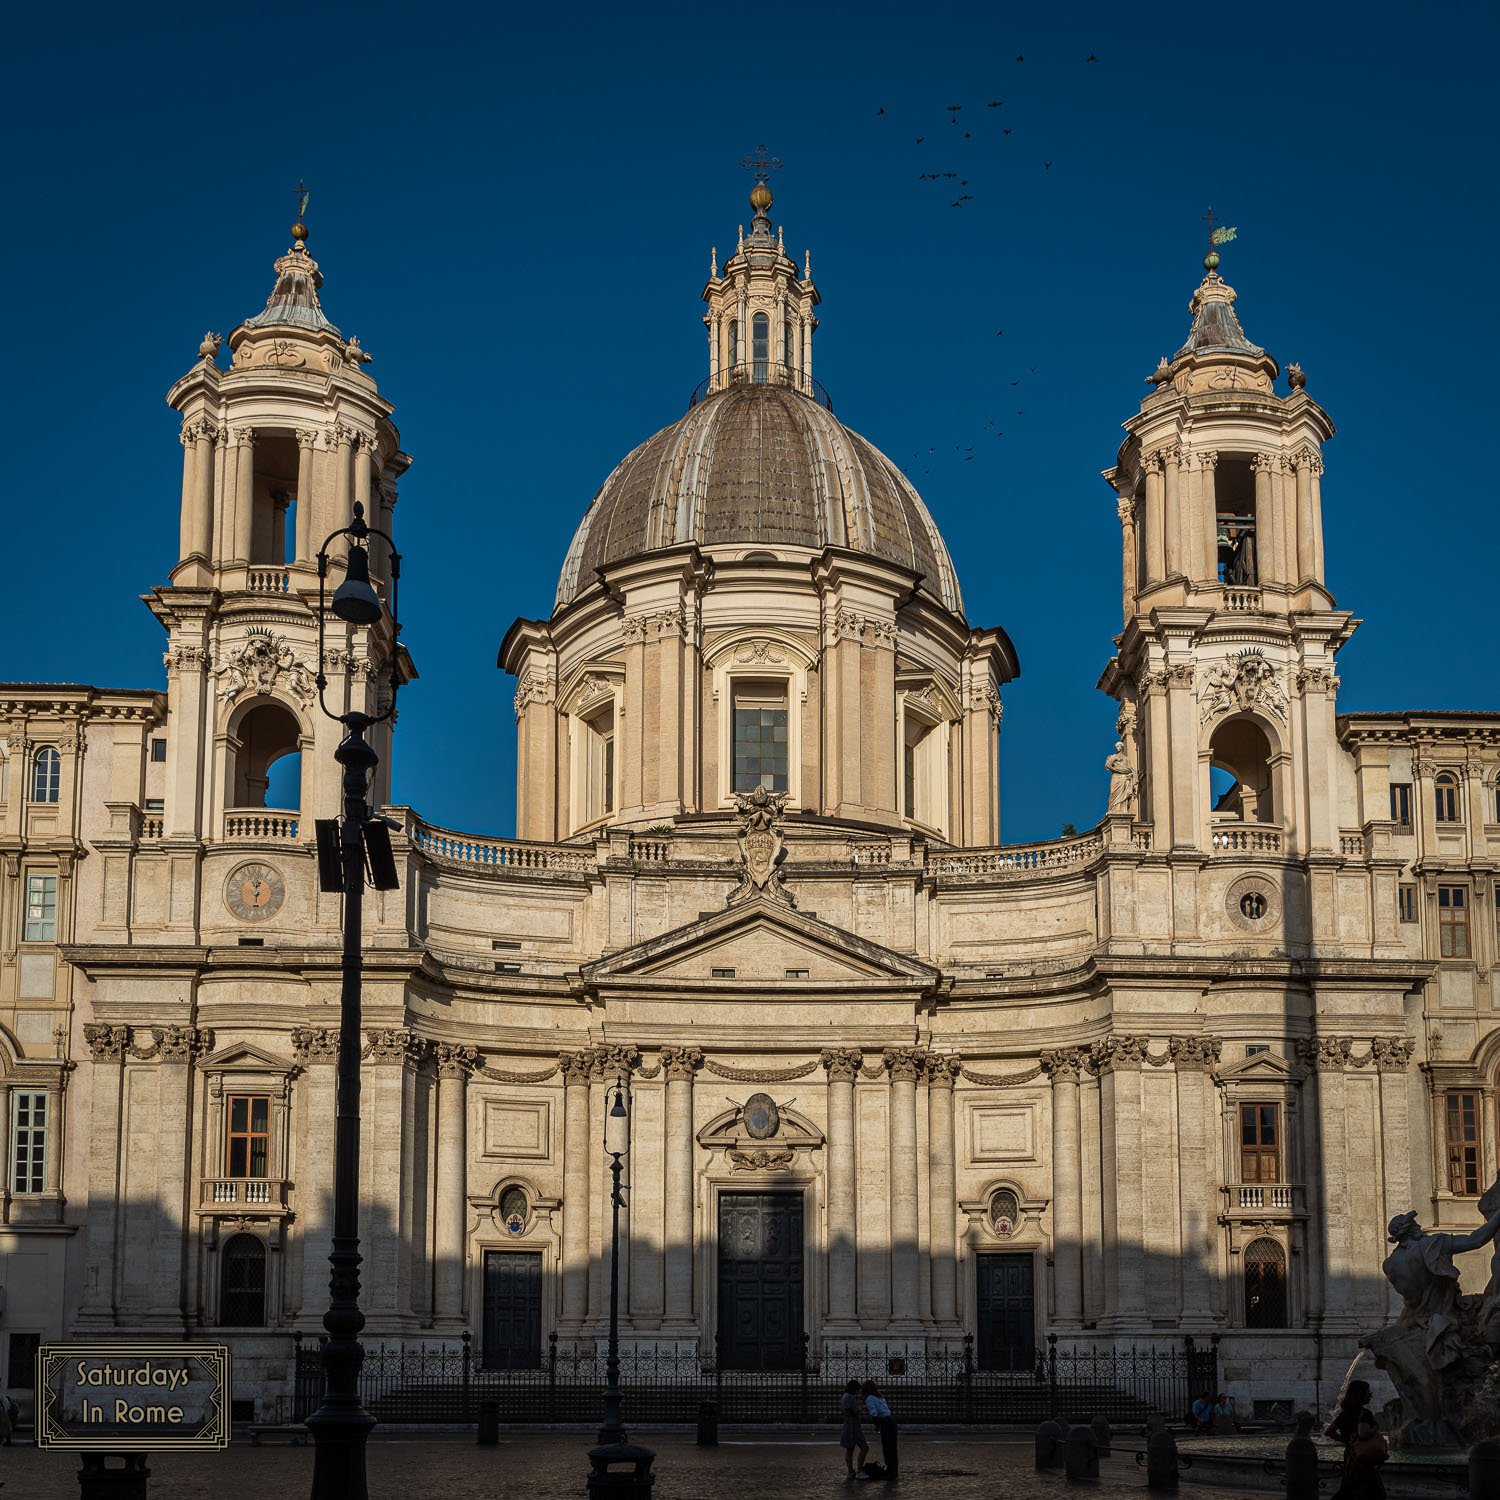 Piazza Navona - The Church of Sant'Agnese in Agone